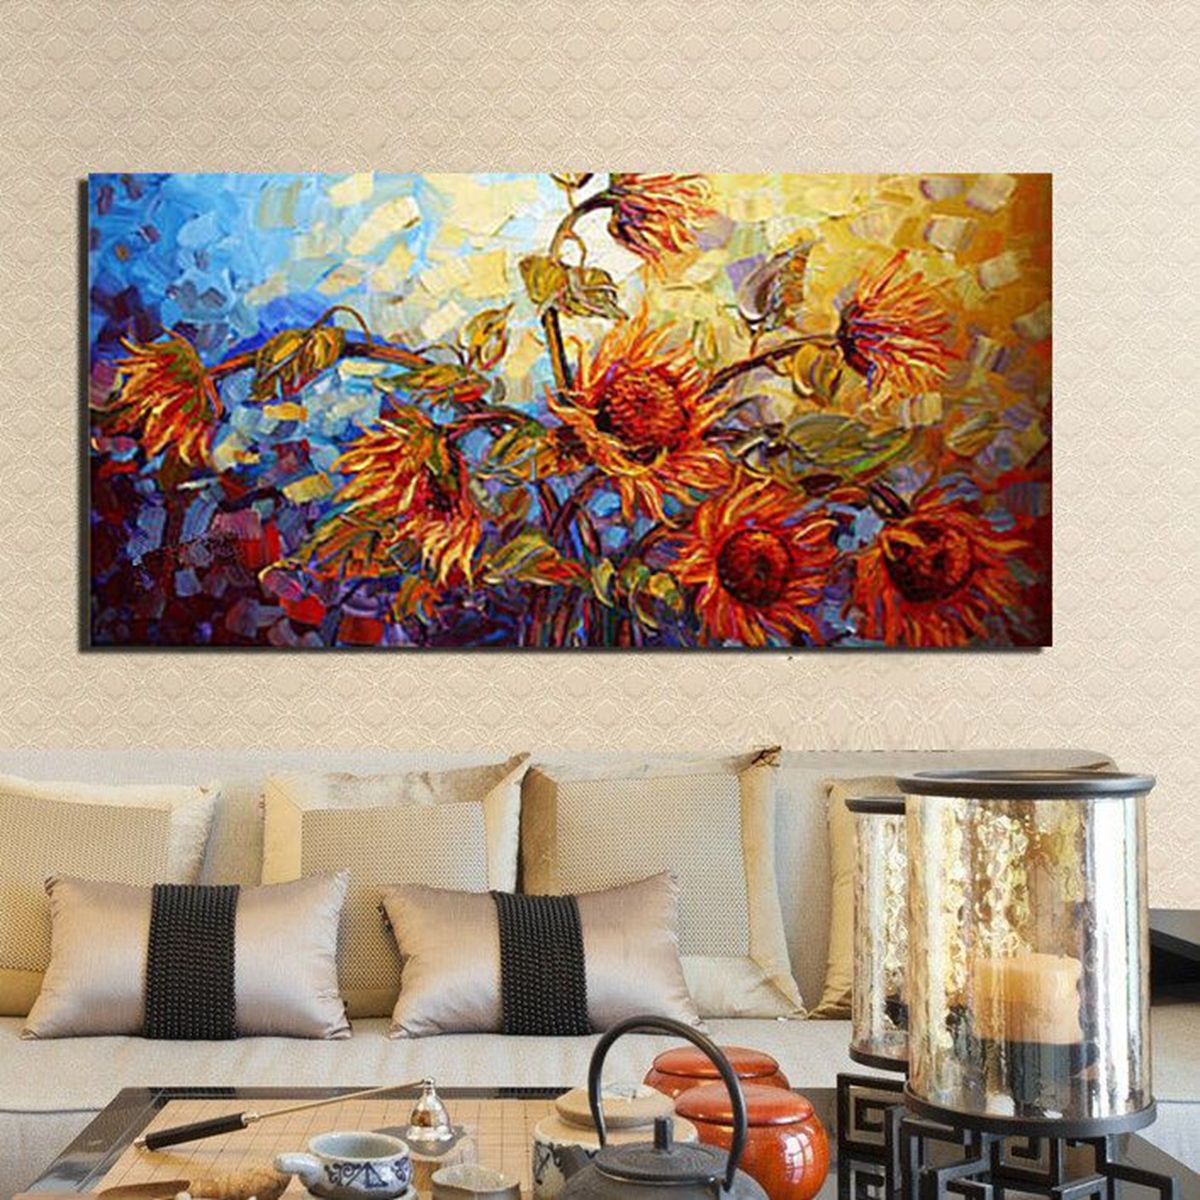 Unframed/framed Modern Canvas Oil Painting Print Picture Throughout Most Recently Released Wall Framed Art Prints (View 6 of 20)